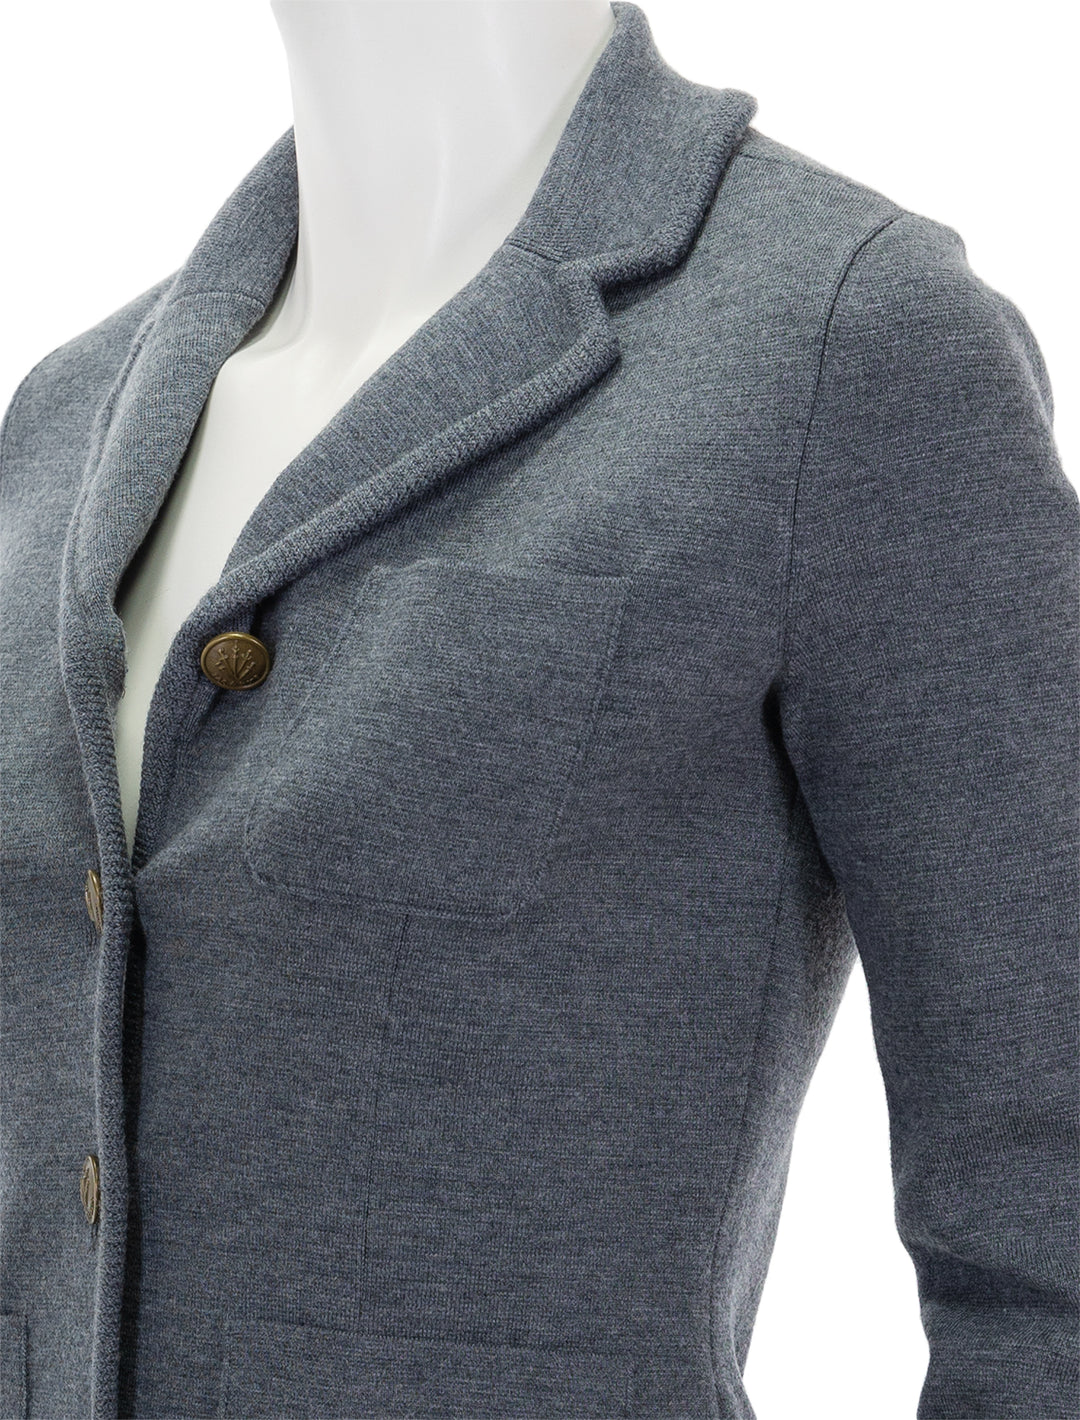 Close-up view of Rag & Bone's abigail blazer in charcoal.